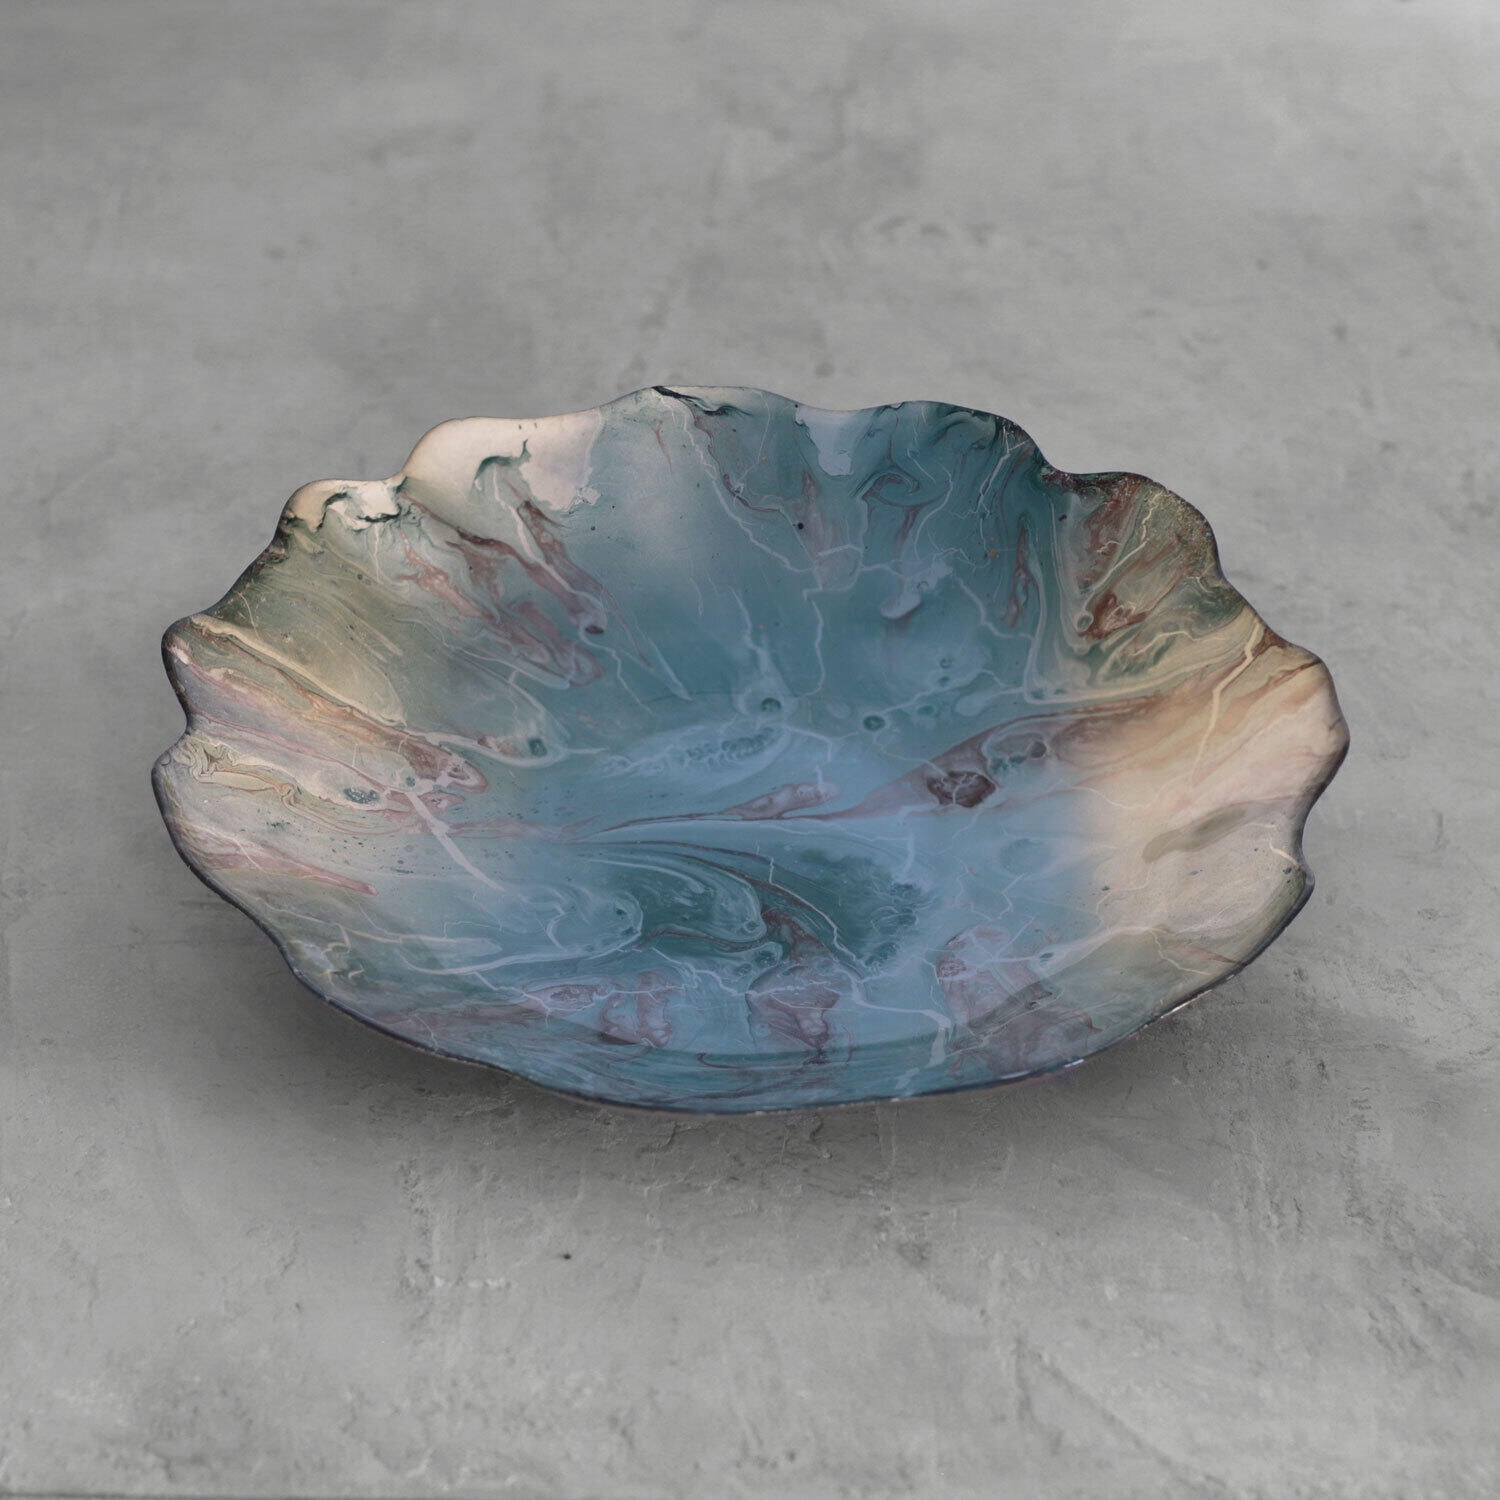 GLASS New Orleans Foil Leafing Centerpiece with Scalloped Edges (Light Teal &amp; Gold)